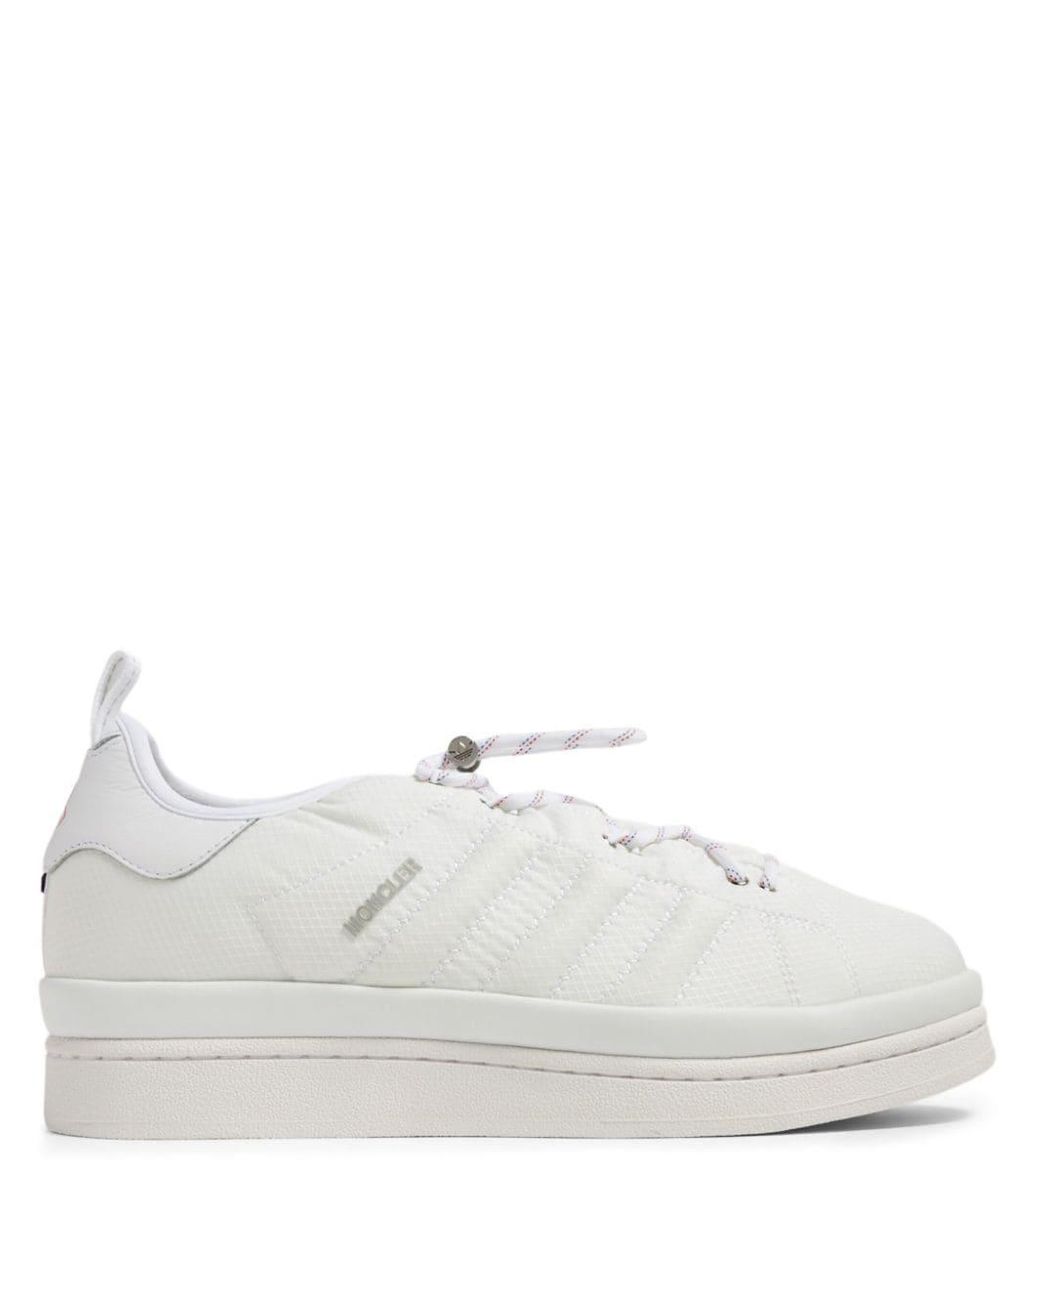 Moncler X Adidas Superstar Padded Sneakers in White for Men | Lyst UK